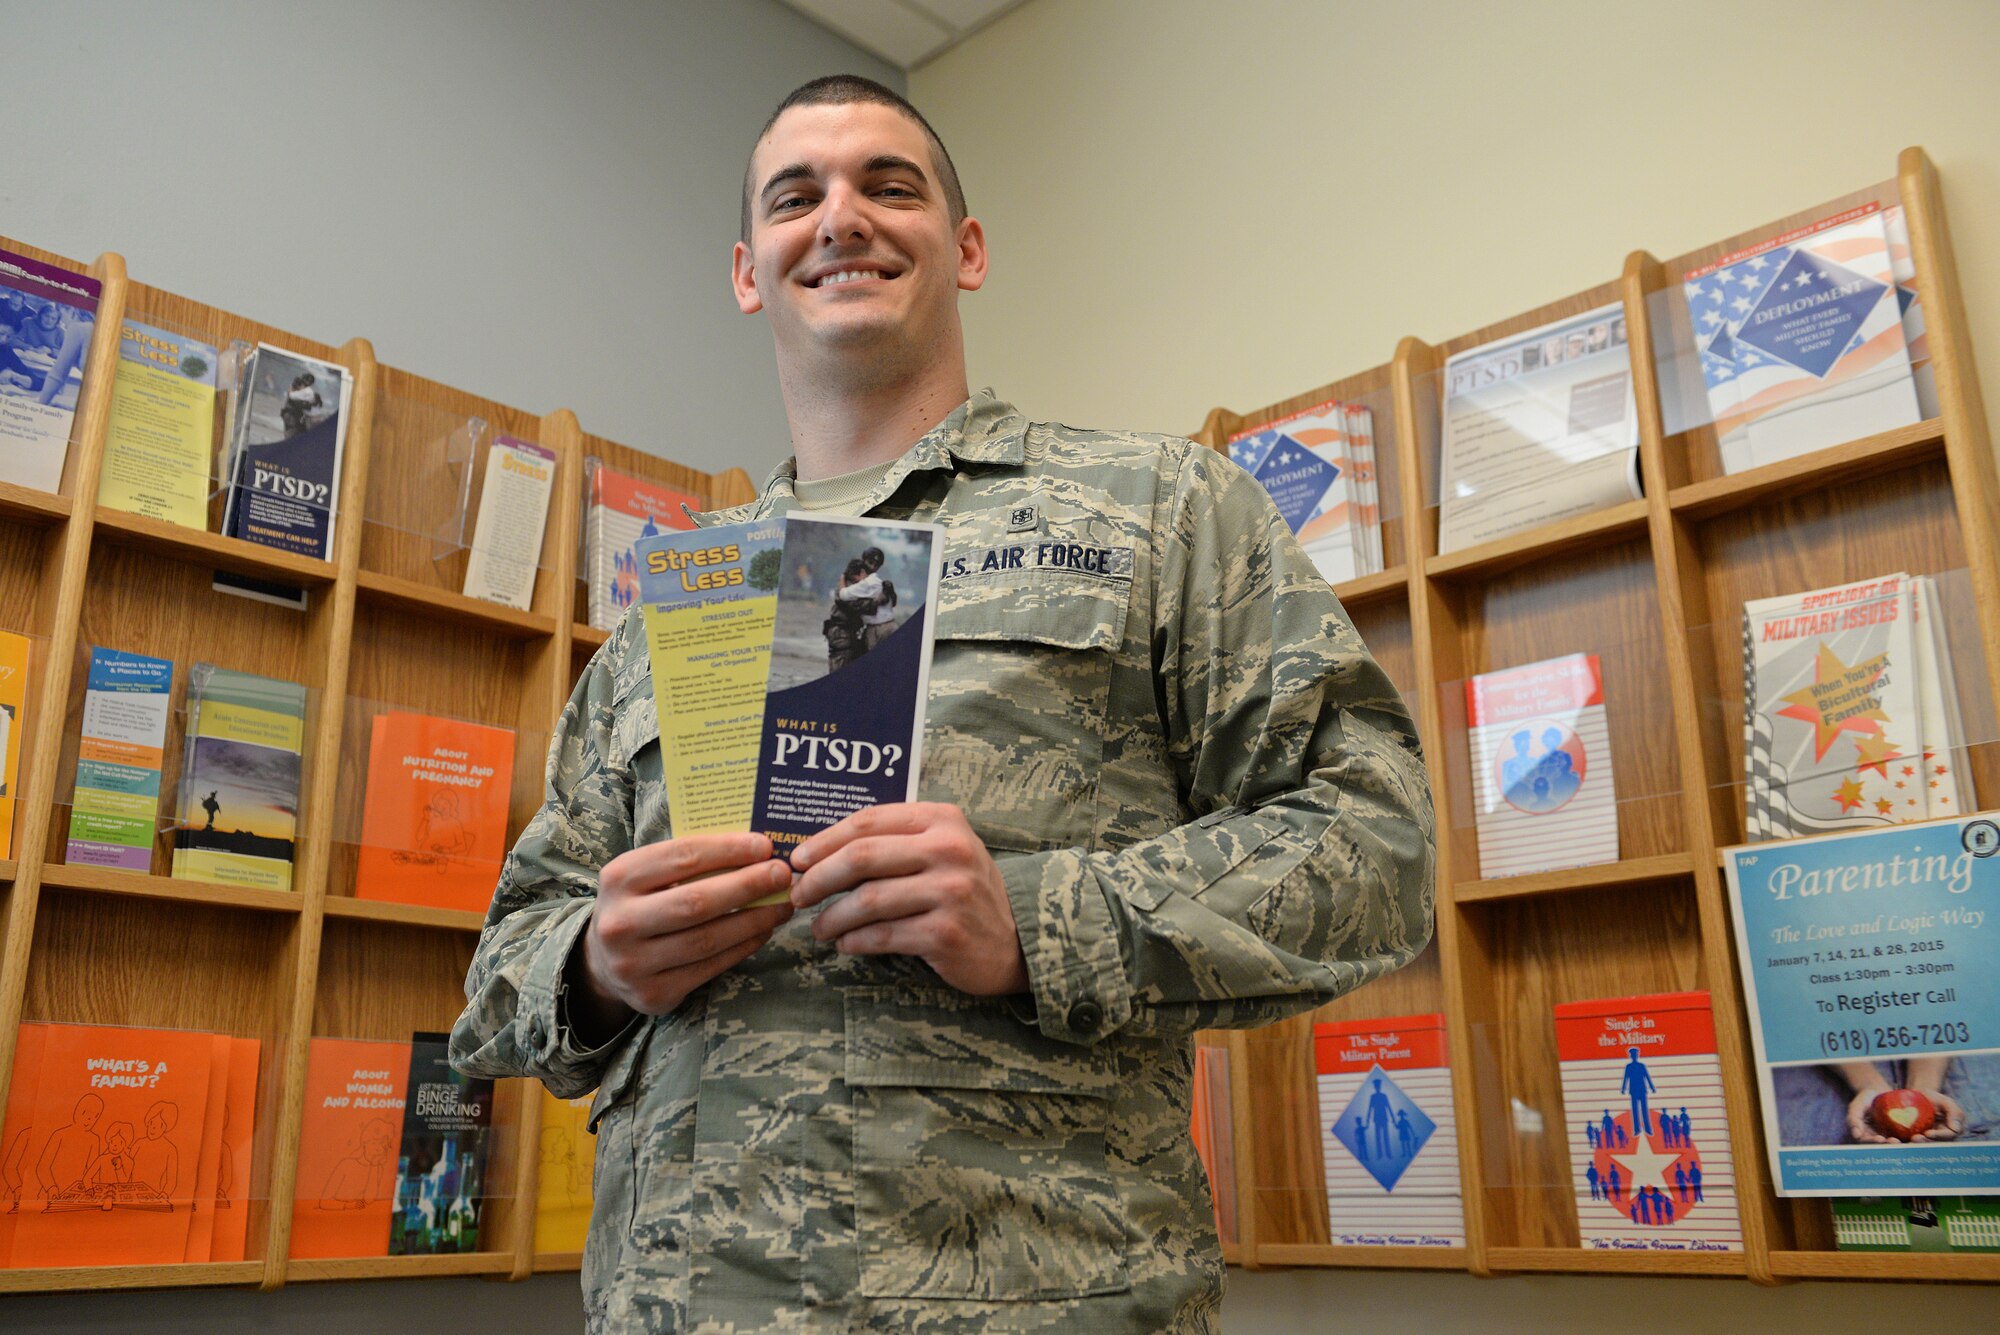 Airman 1st Class Brandon Haag, 375th Medical Group mental health technician, has seen a variety of patient dilemmas, Feb. 9, 2015. Haag has been a technician for 5 years, and says he appreciates knowing how to ask the right questions to best help patients. (U.S. Air Force photo by Airman 1st Class Erica Crossen)